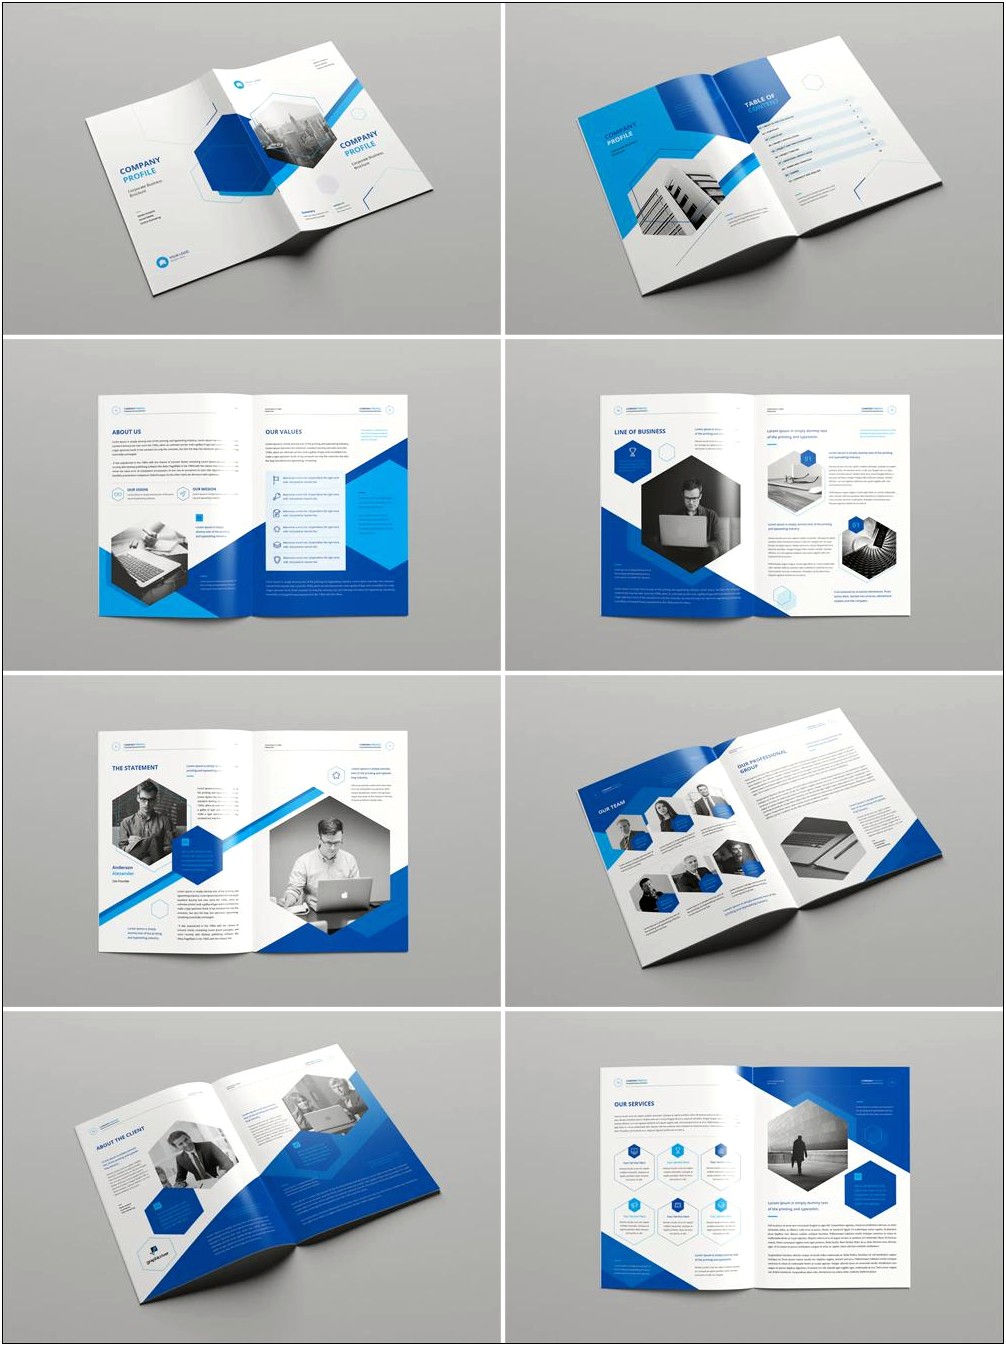 company profile after effects template free download